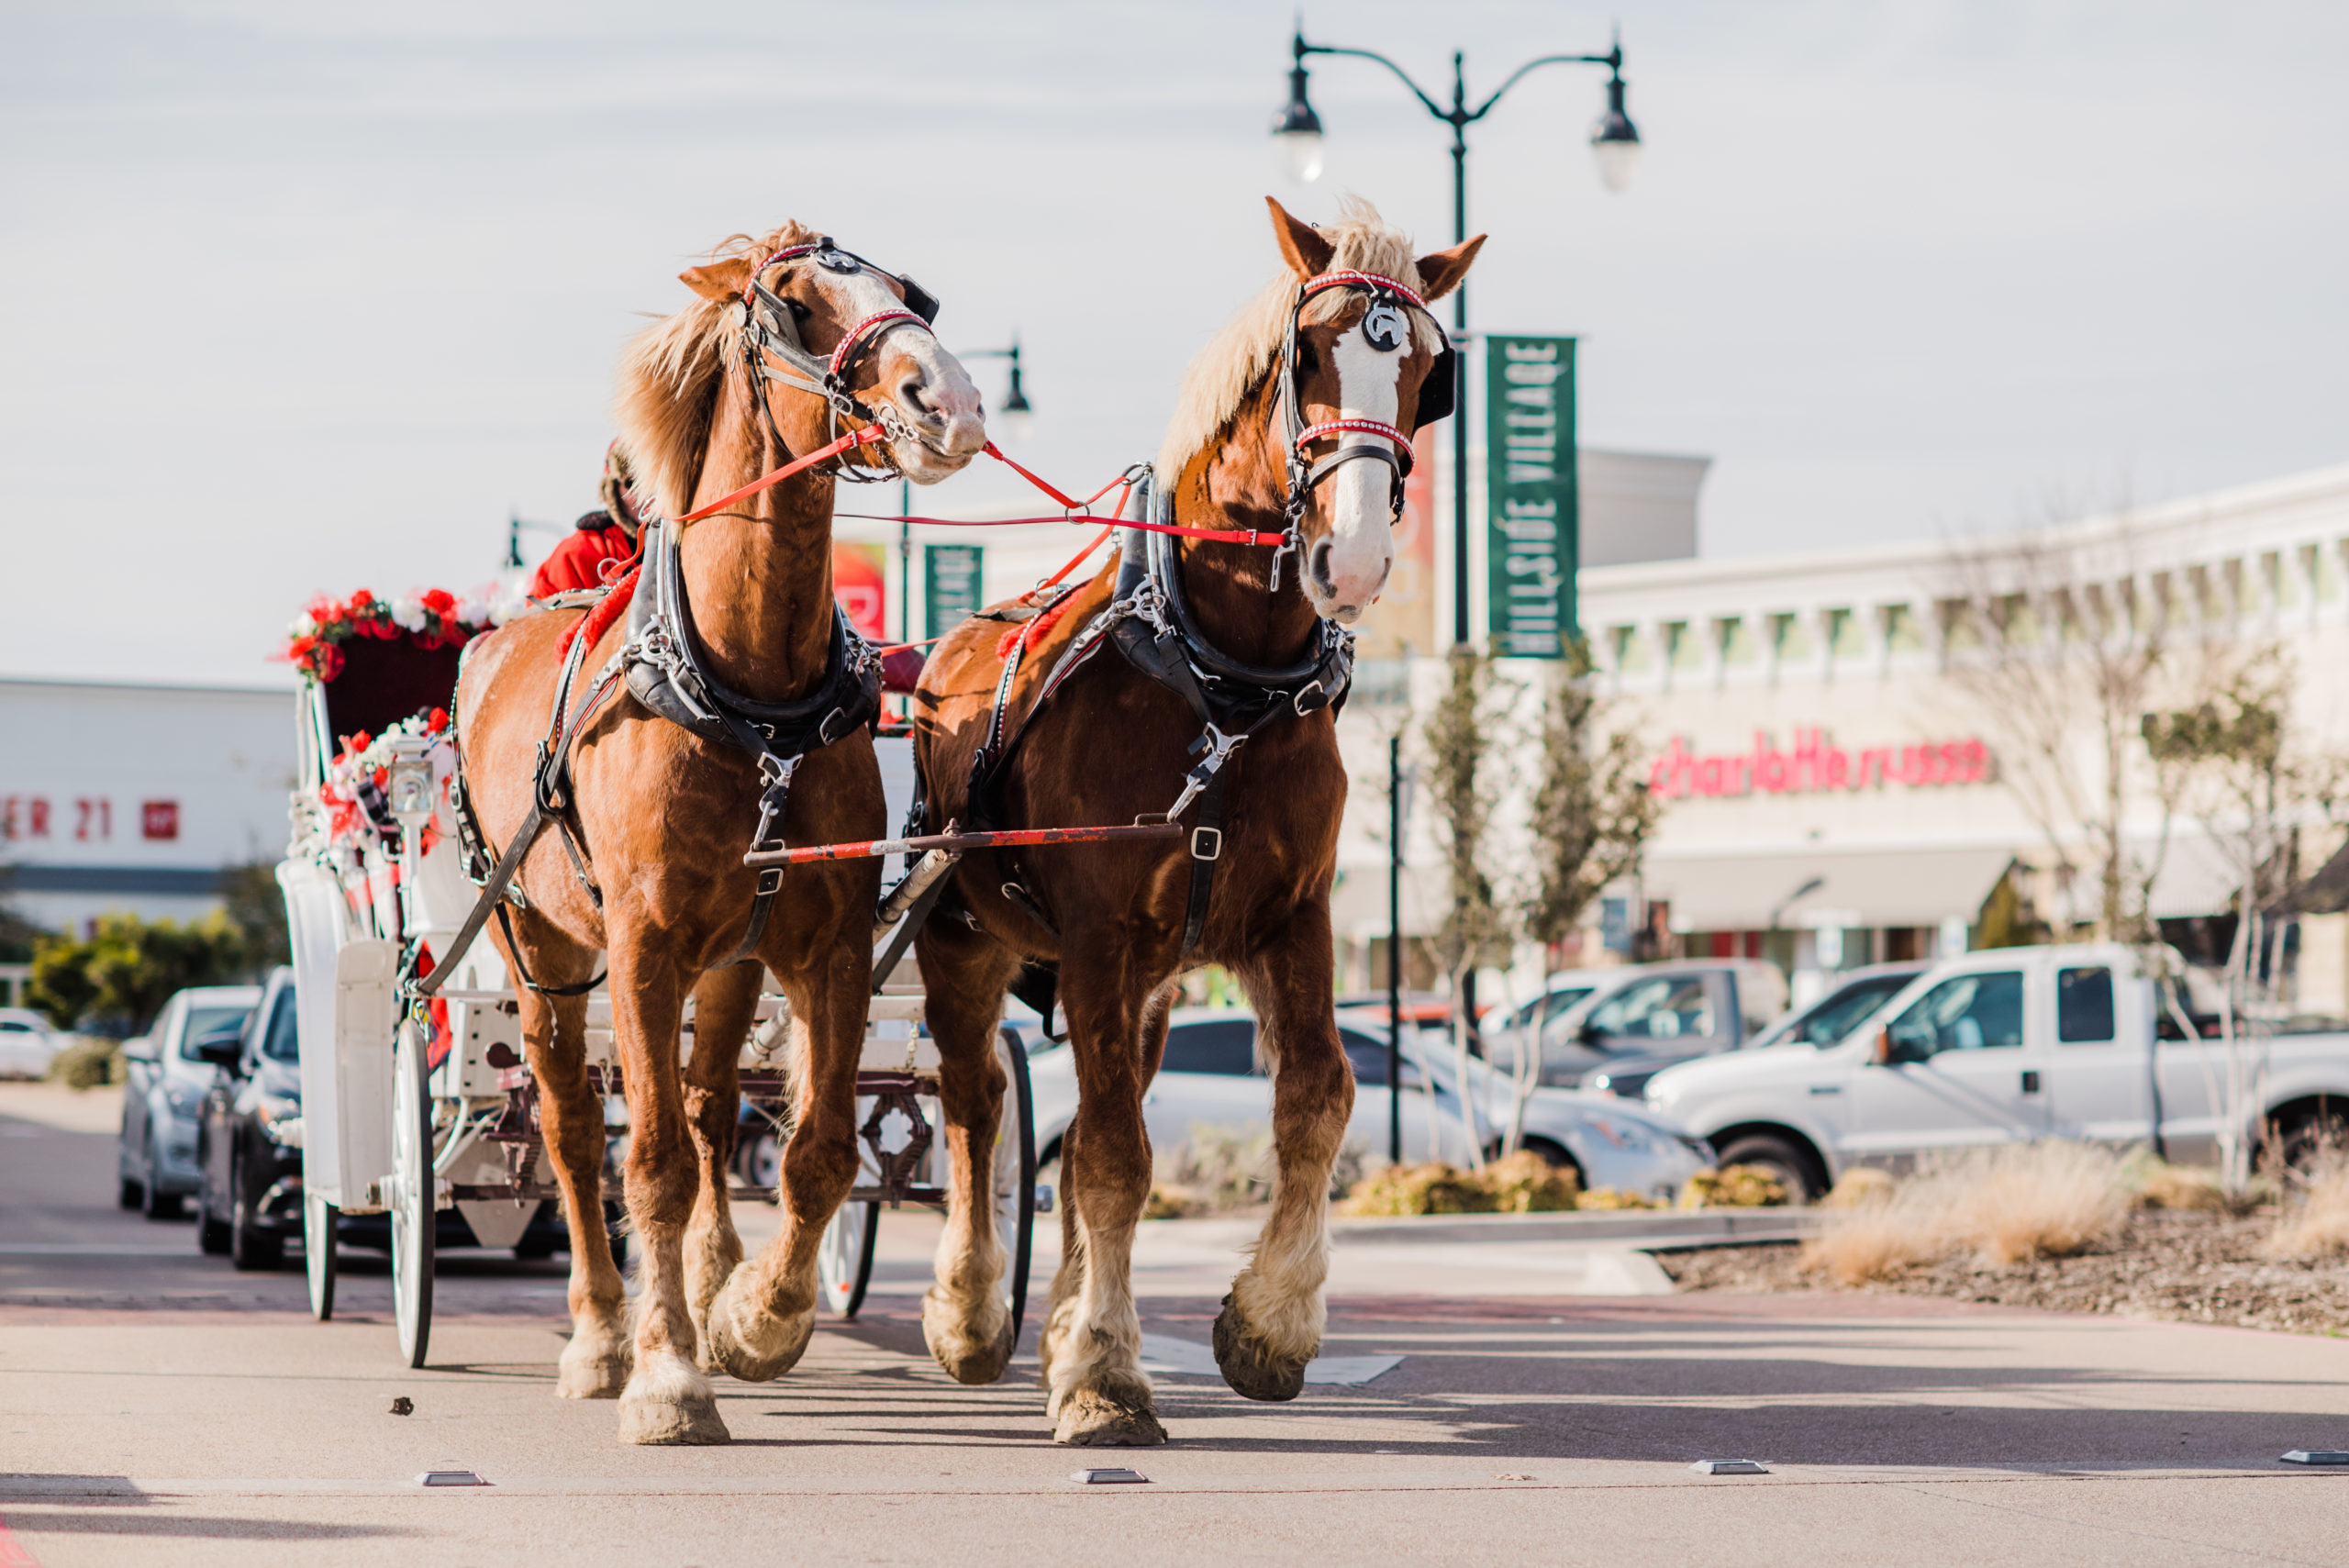 Horses pulling a carriage around shopping center.